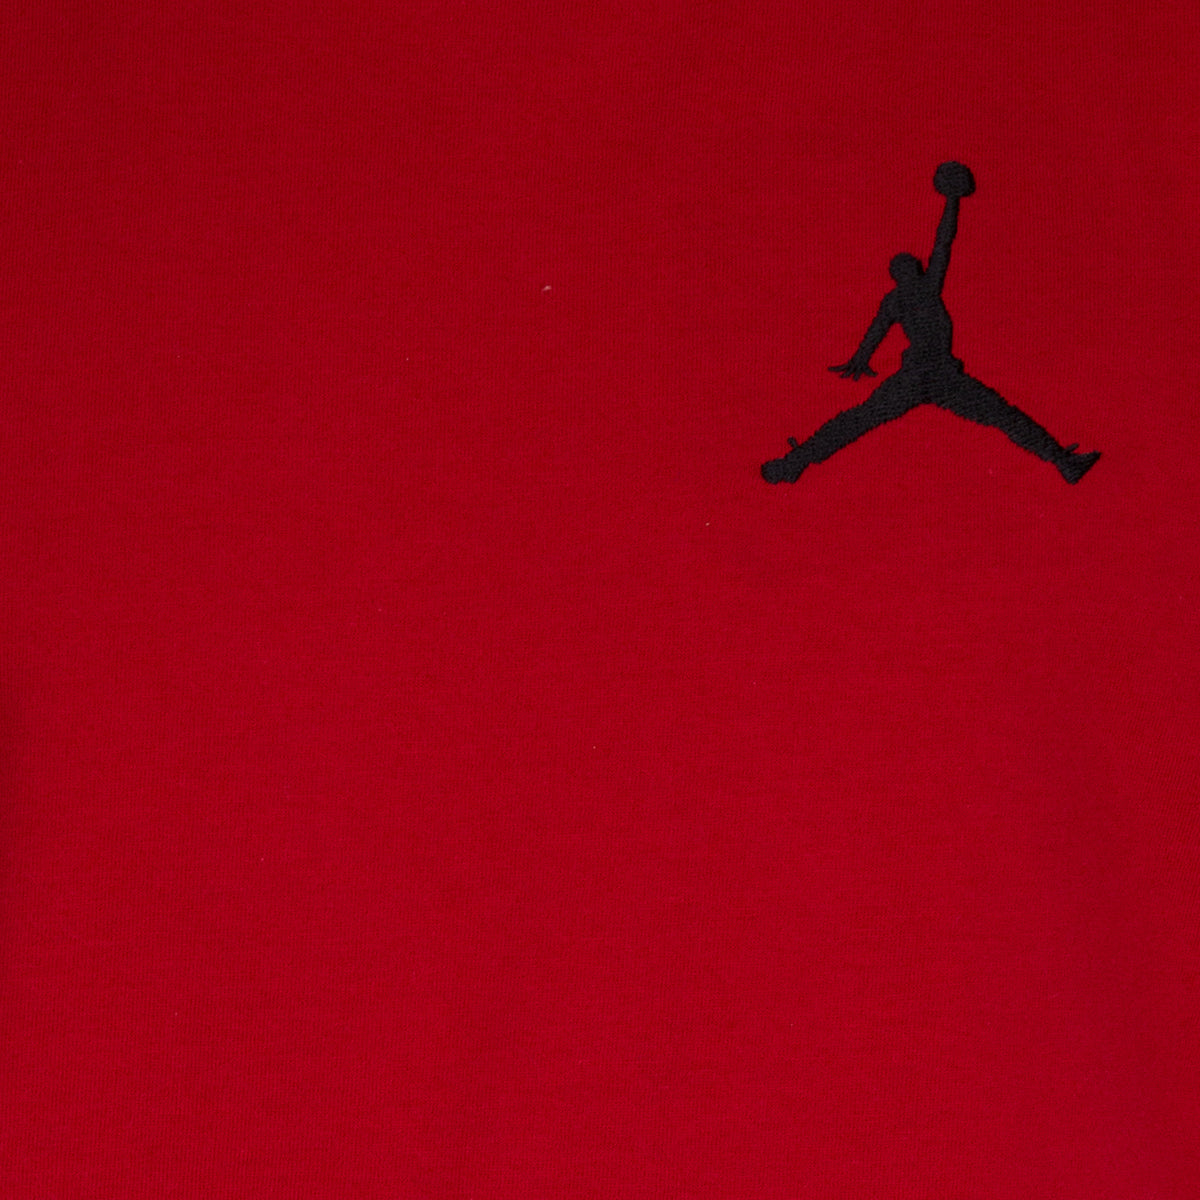 JUMPMAN AIR EMBROIDERY